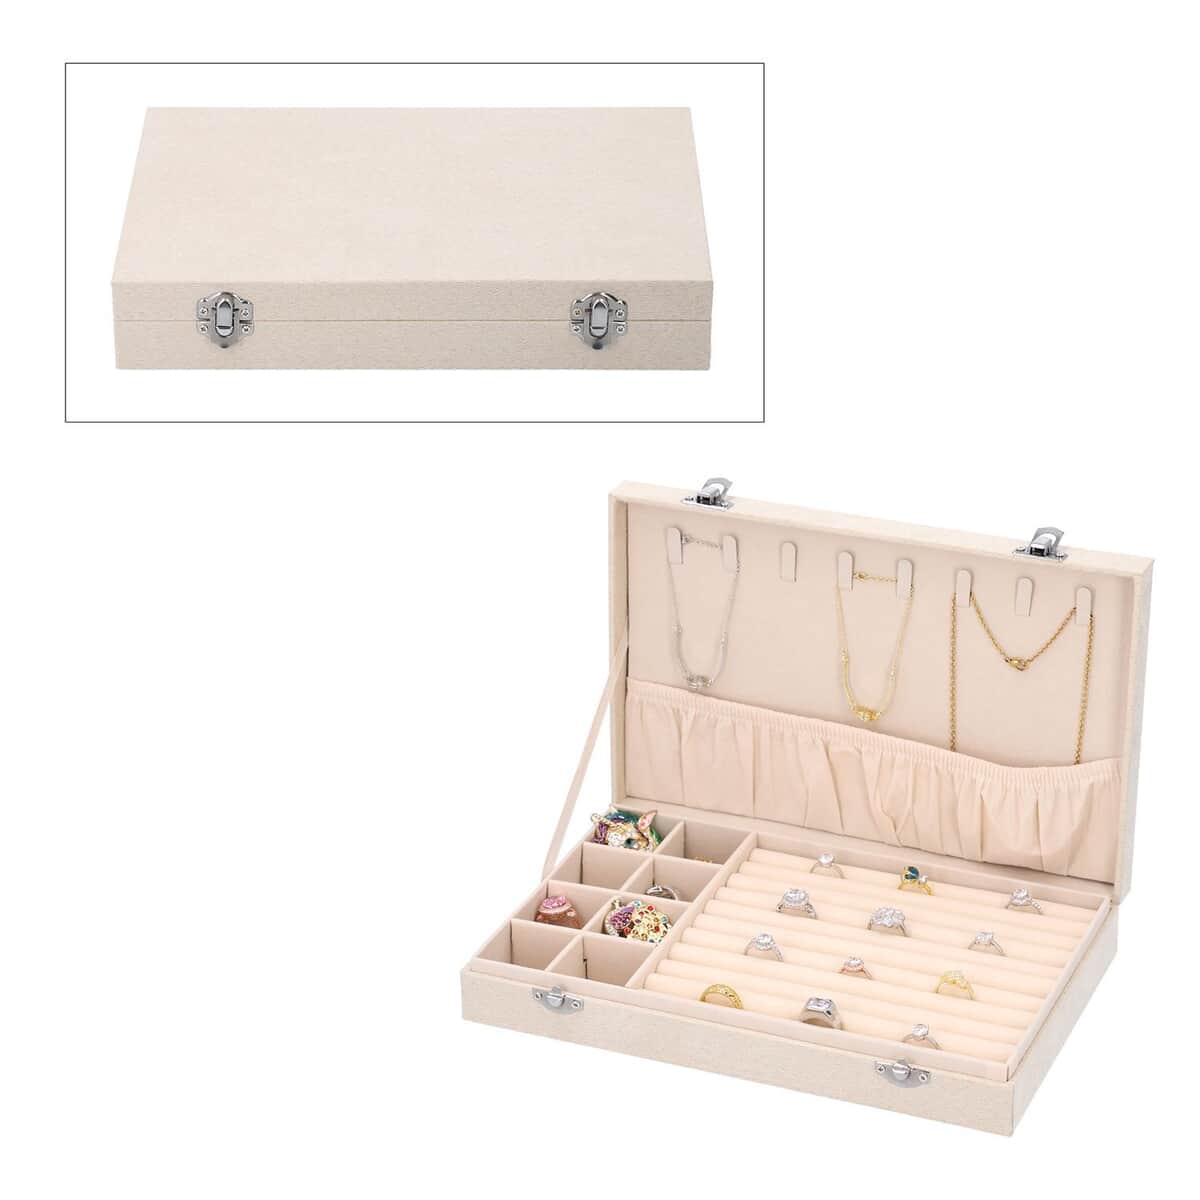 Buy Ivory Velvet Jewelry Box with Anti Tarnish Lining & Lock, Anti Tarnish  Jewelry Case, Jewelry Organizer, Jewelry Storage Box (8 Necklace Hooks, 8  Earrings/Pendant Sections and 10 Rings Slots) at ShopLC.